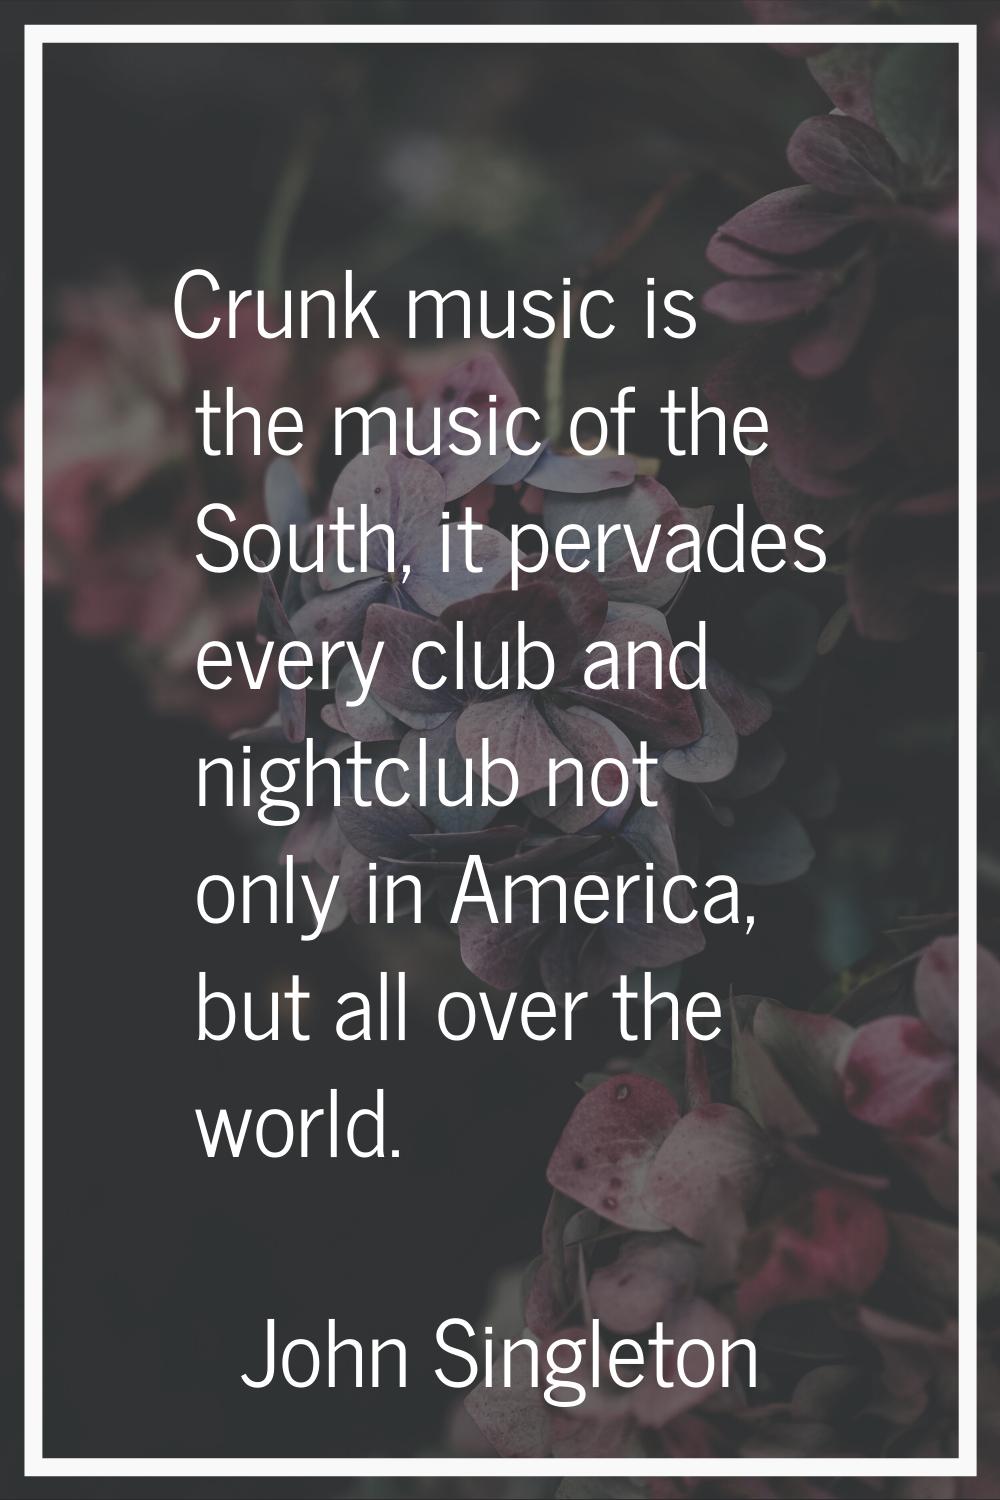 Crunk music is the music of the South, it pervades every club and nightclub not only in America, bu